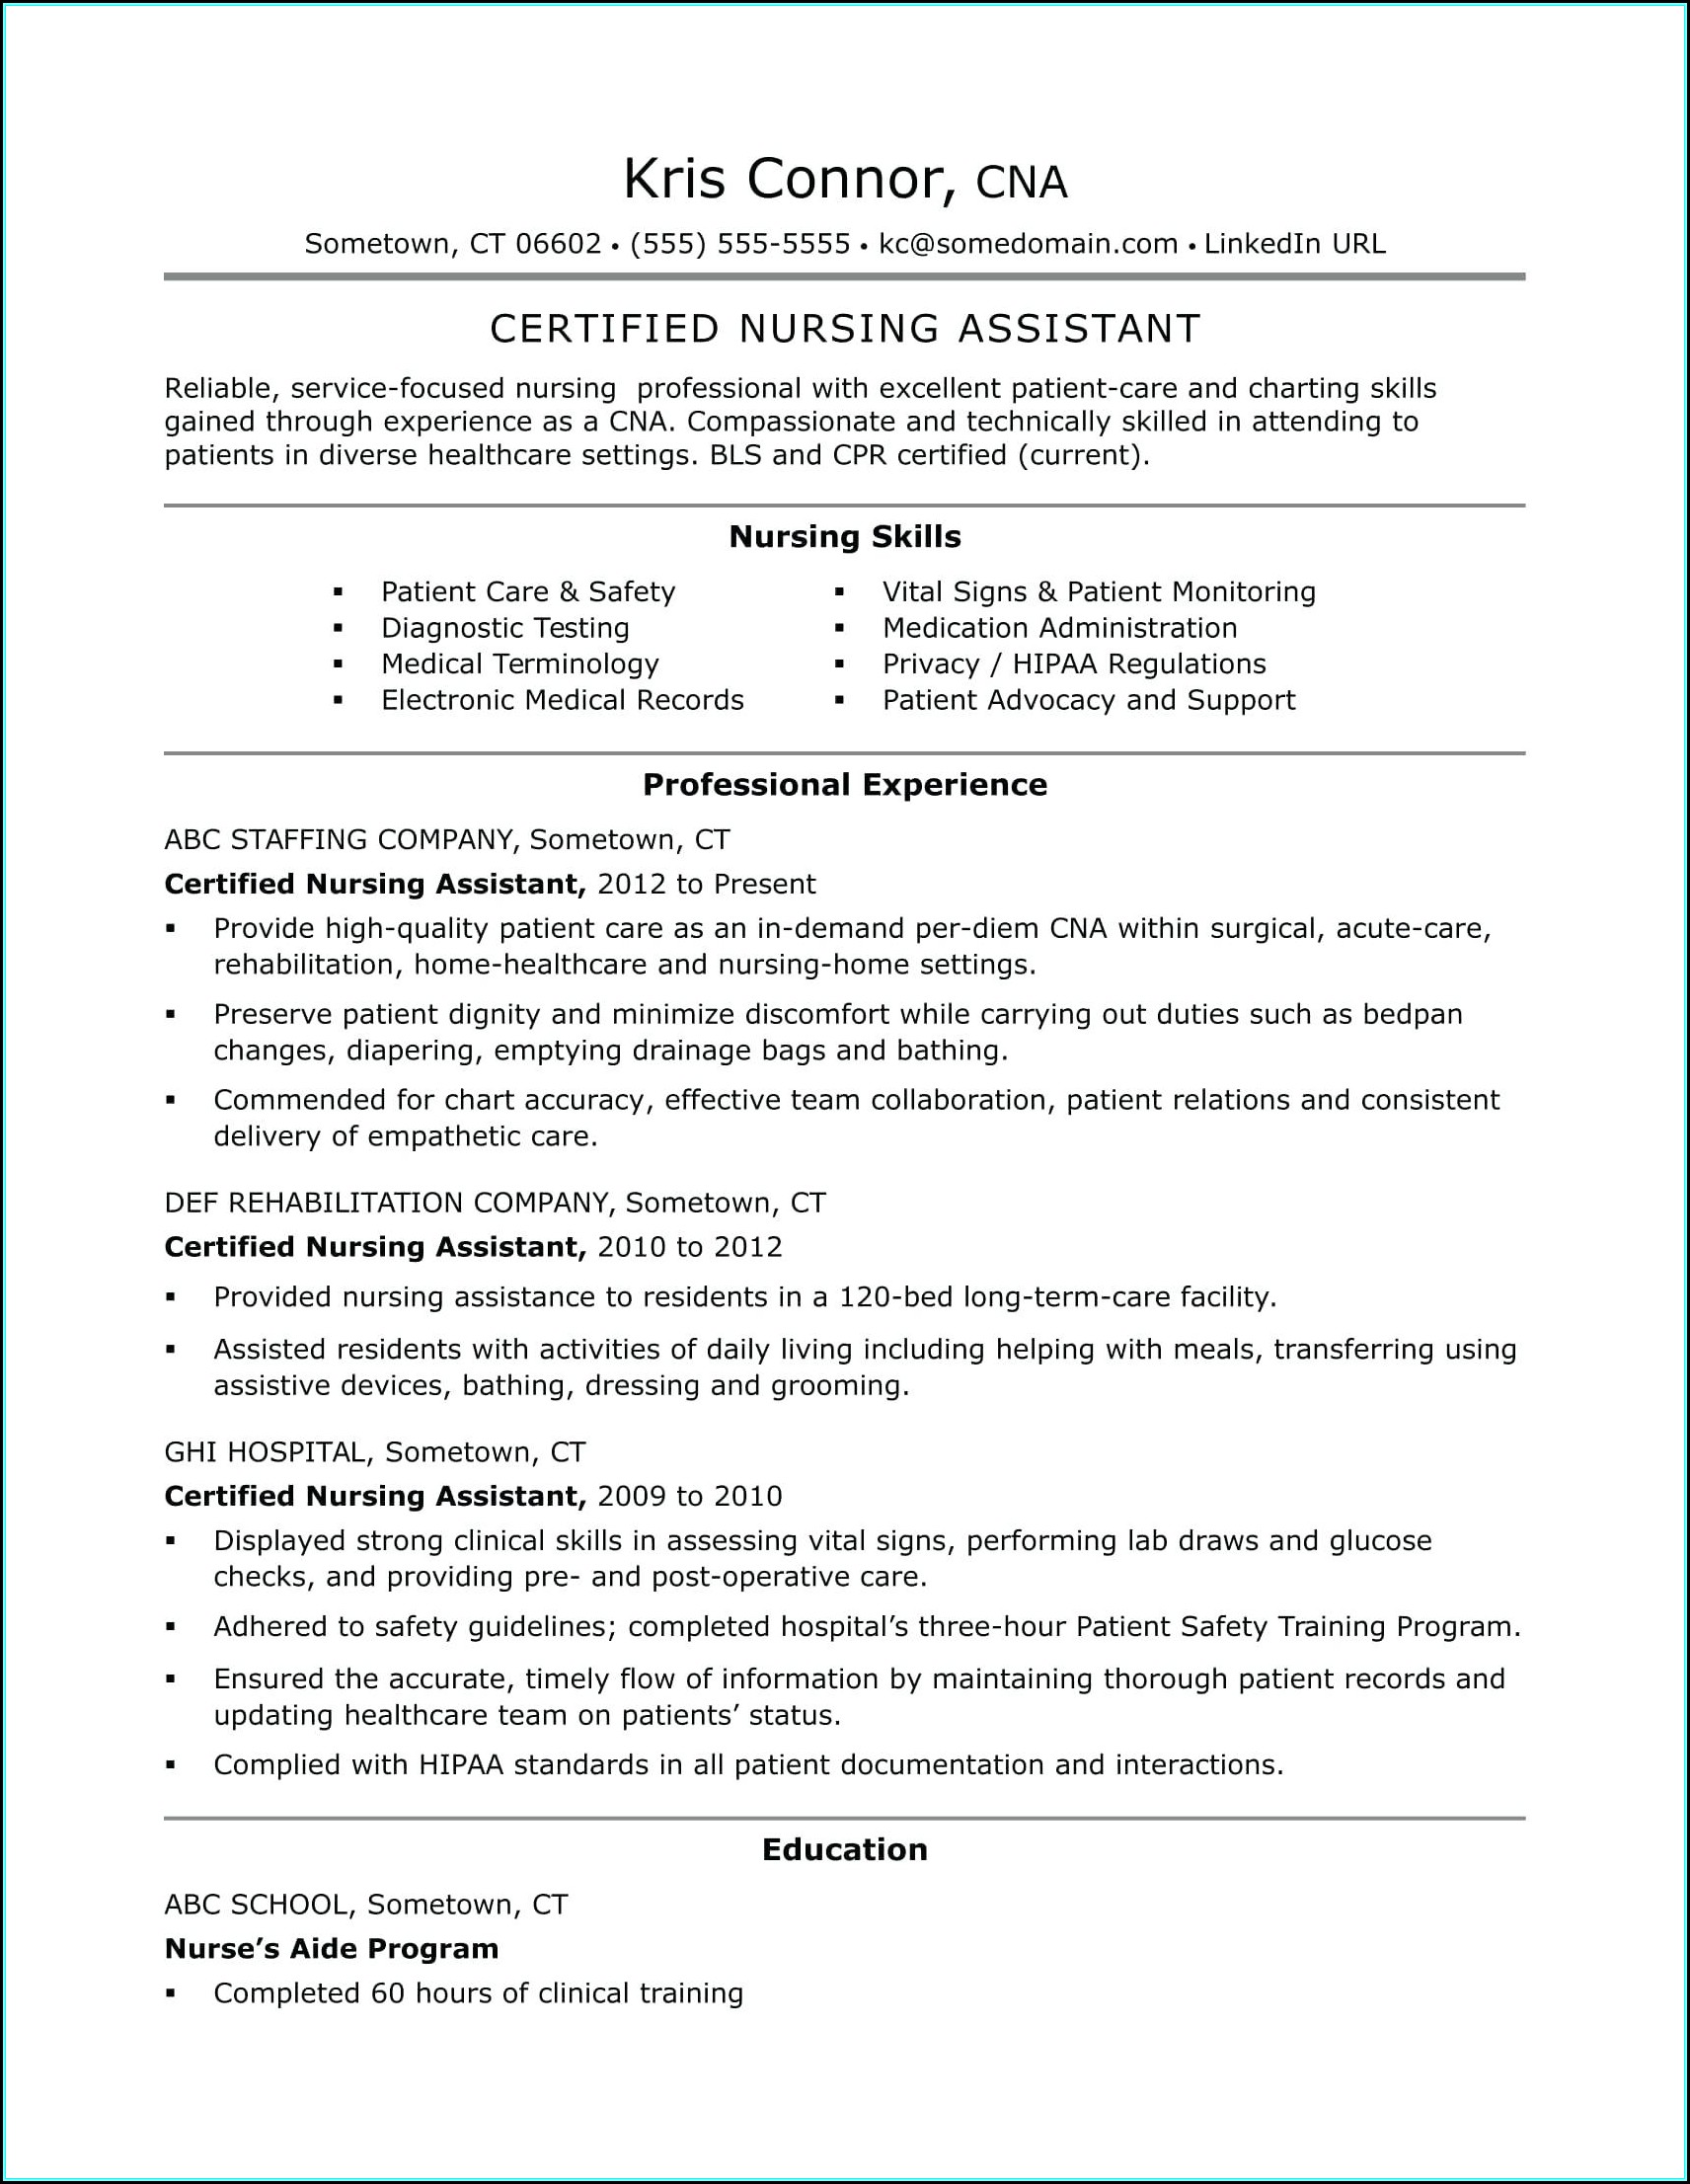 Sample Resume For Nursing Assistant With Experience